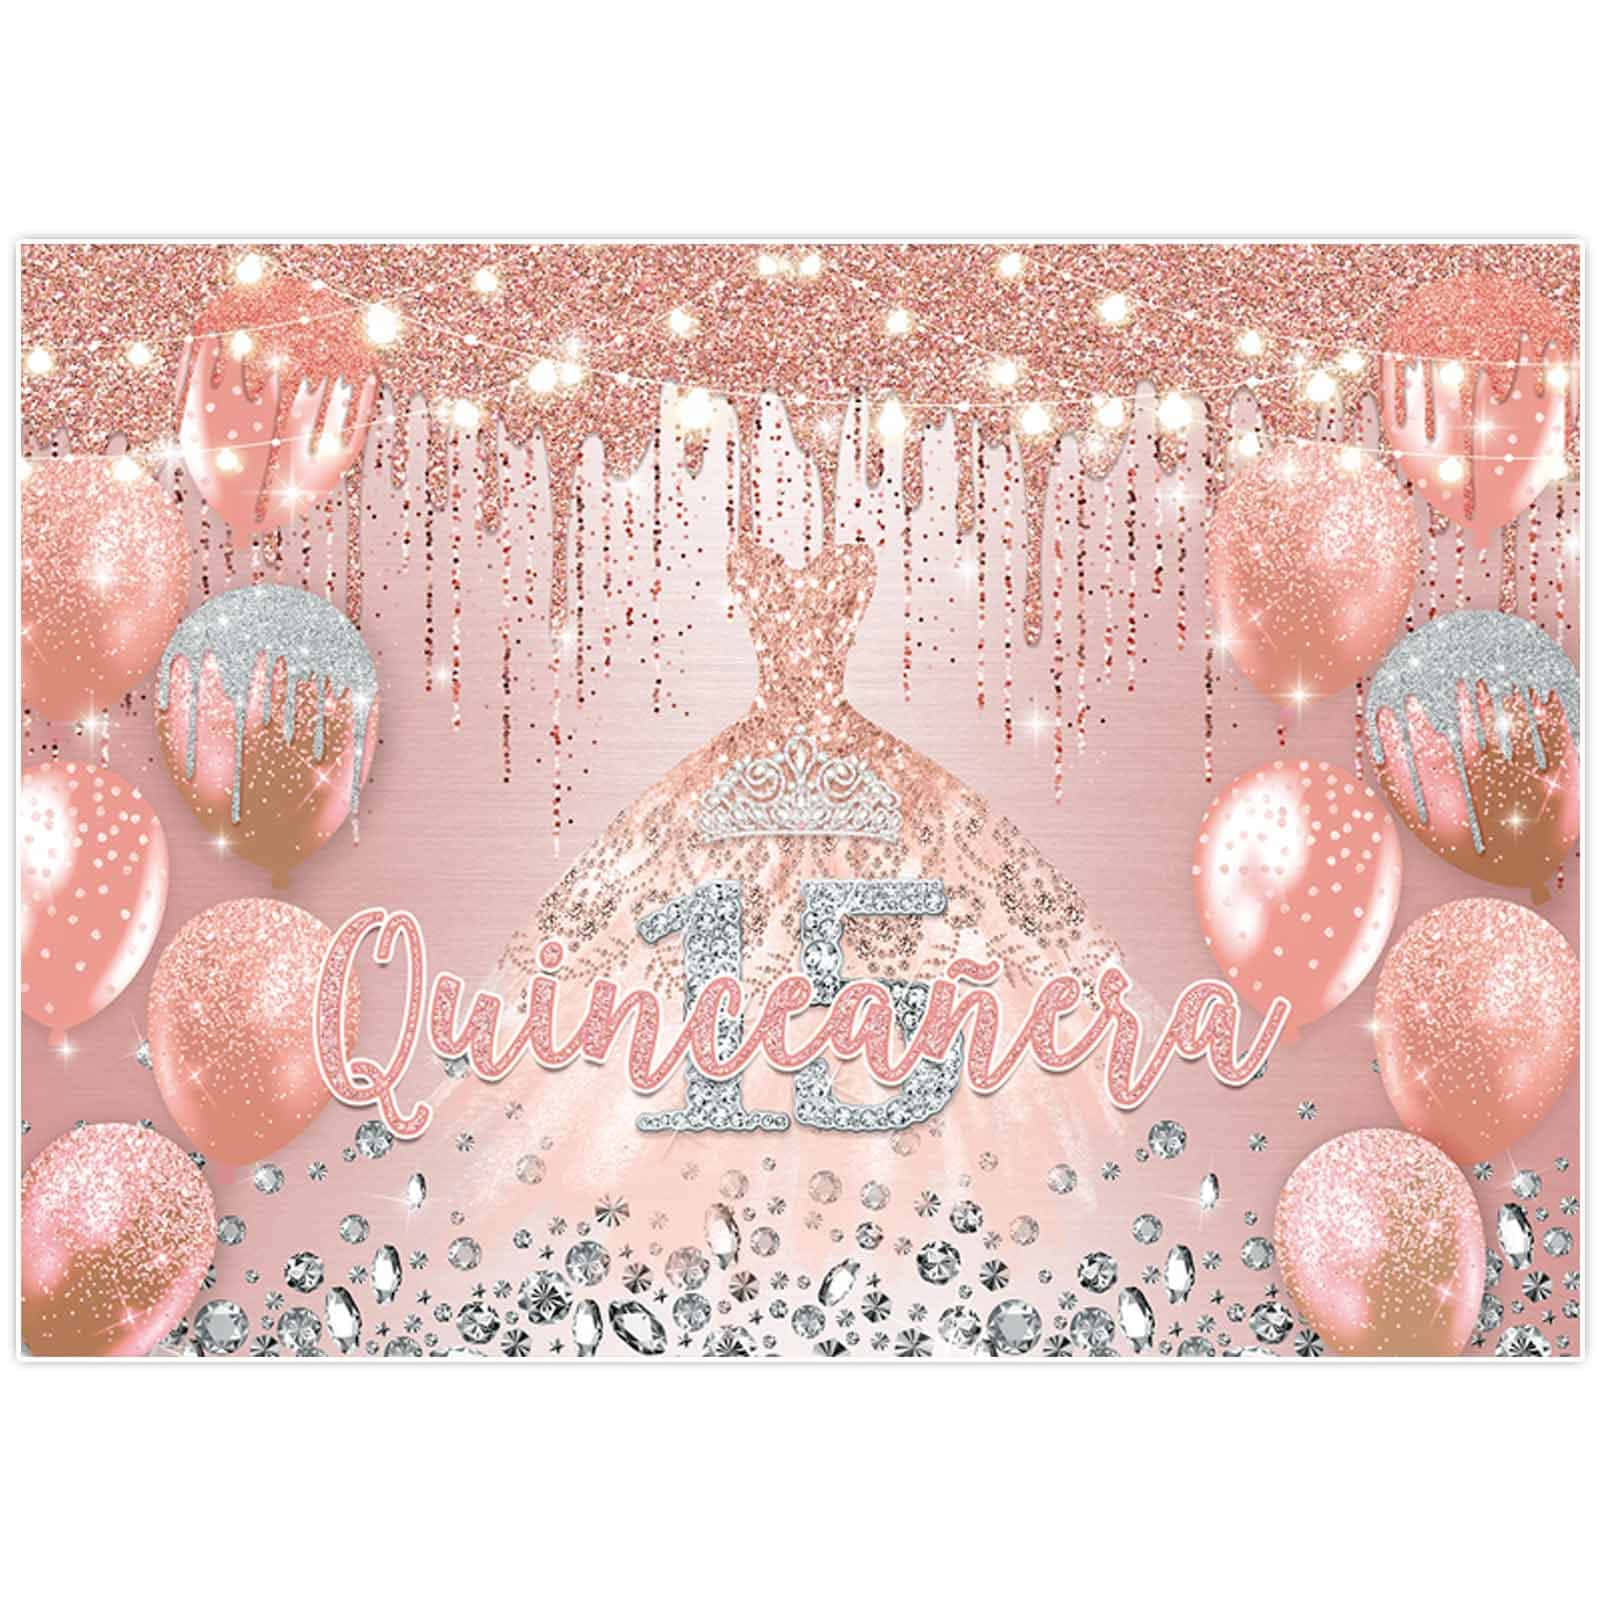 A Pink And Silver Quinceanera Party Kit With Balloons And Balloons